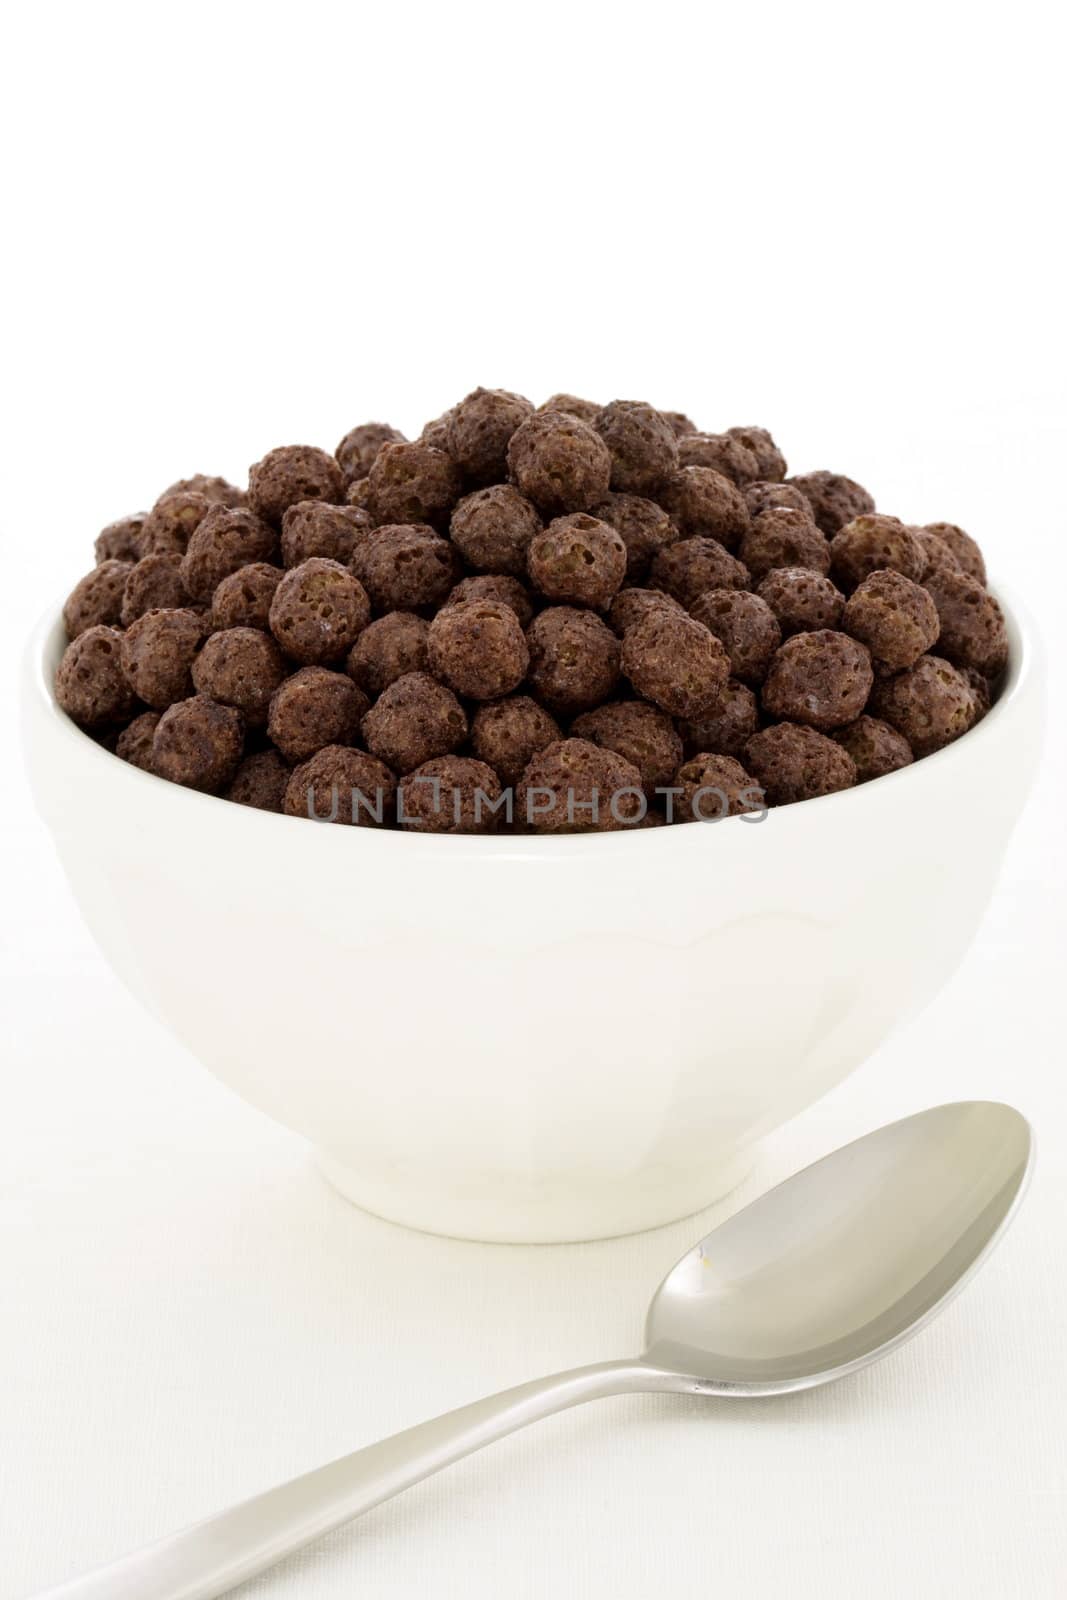 Delicious healthy chocolate kids cereal by tacar